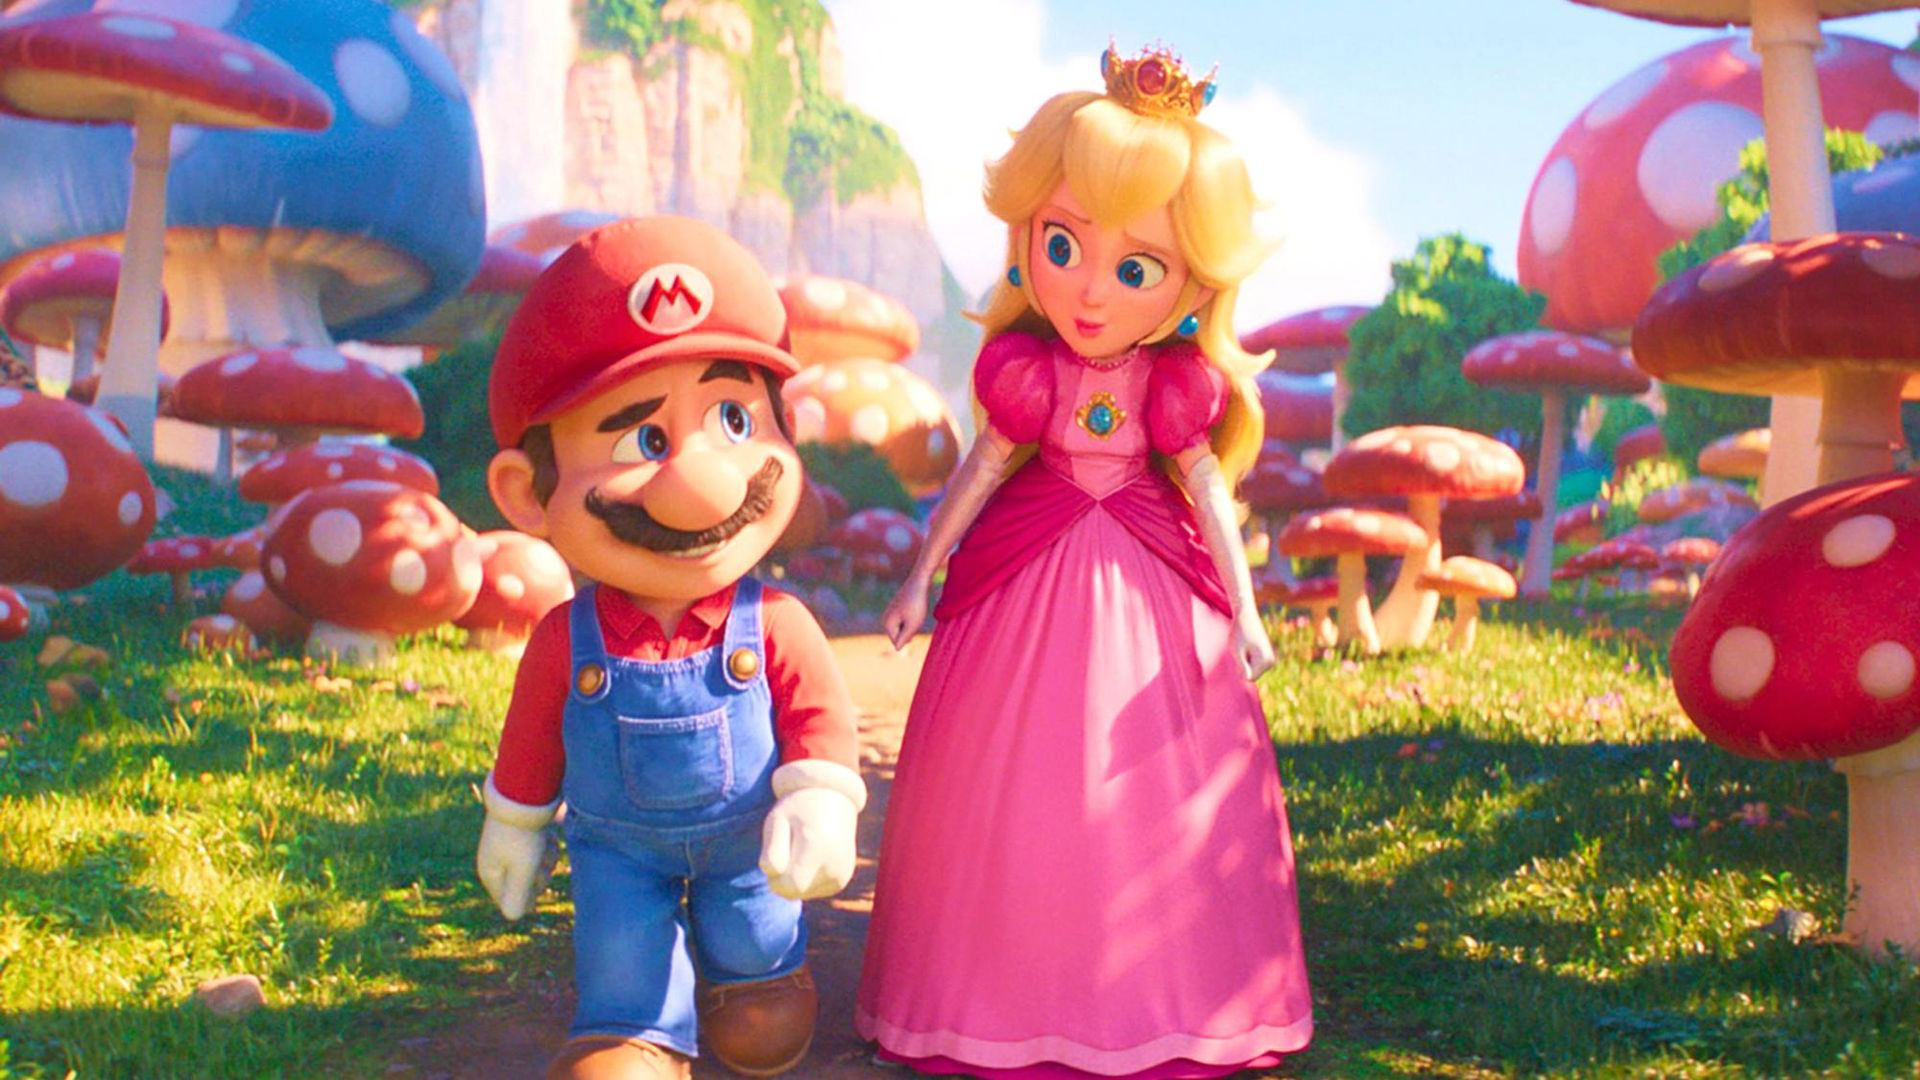 Nintendo Switch 2 could launch with a brand new Mario game